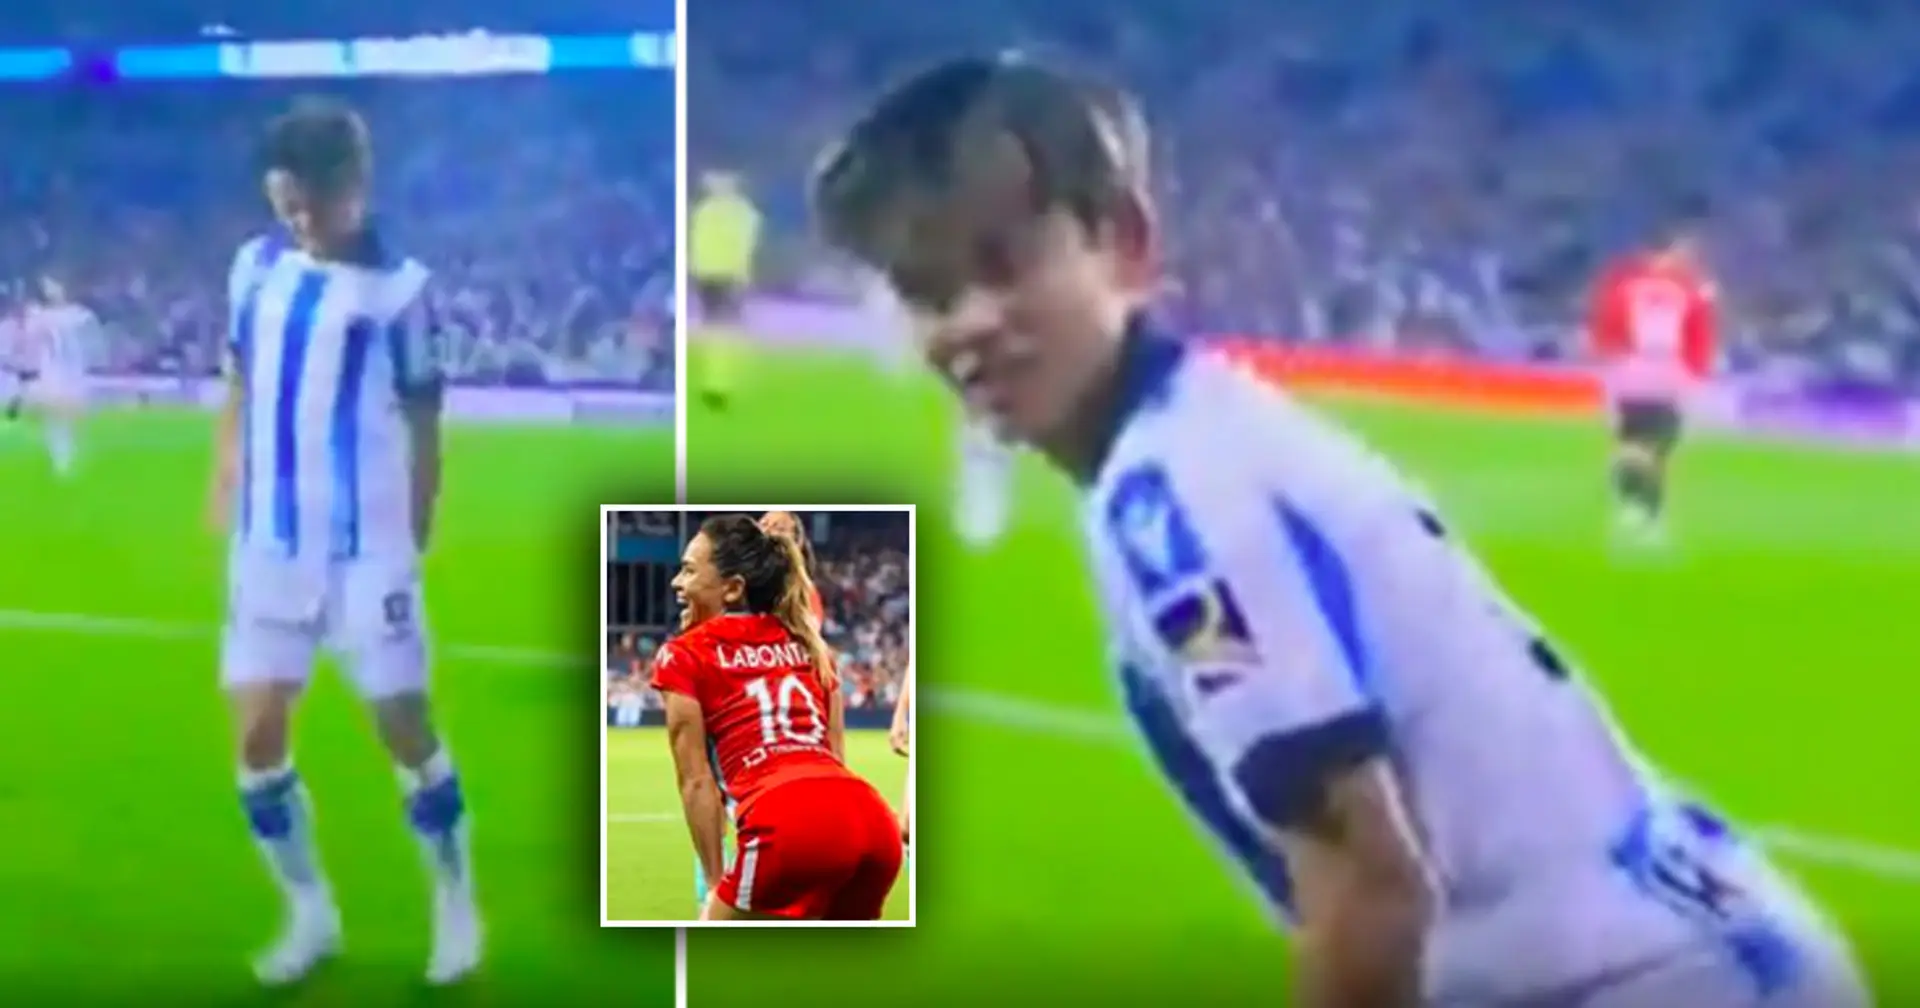 Takefusa Kubo twerking and touching butt during Athletic Bilbao game – what? Explained